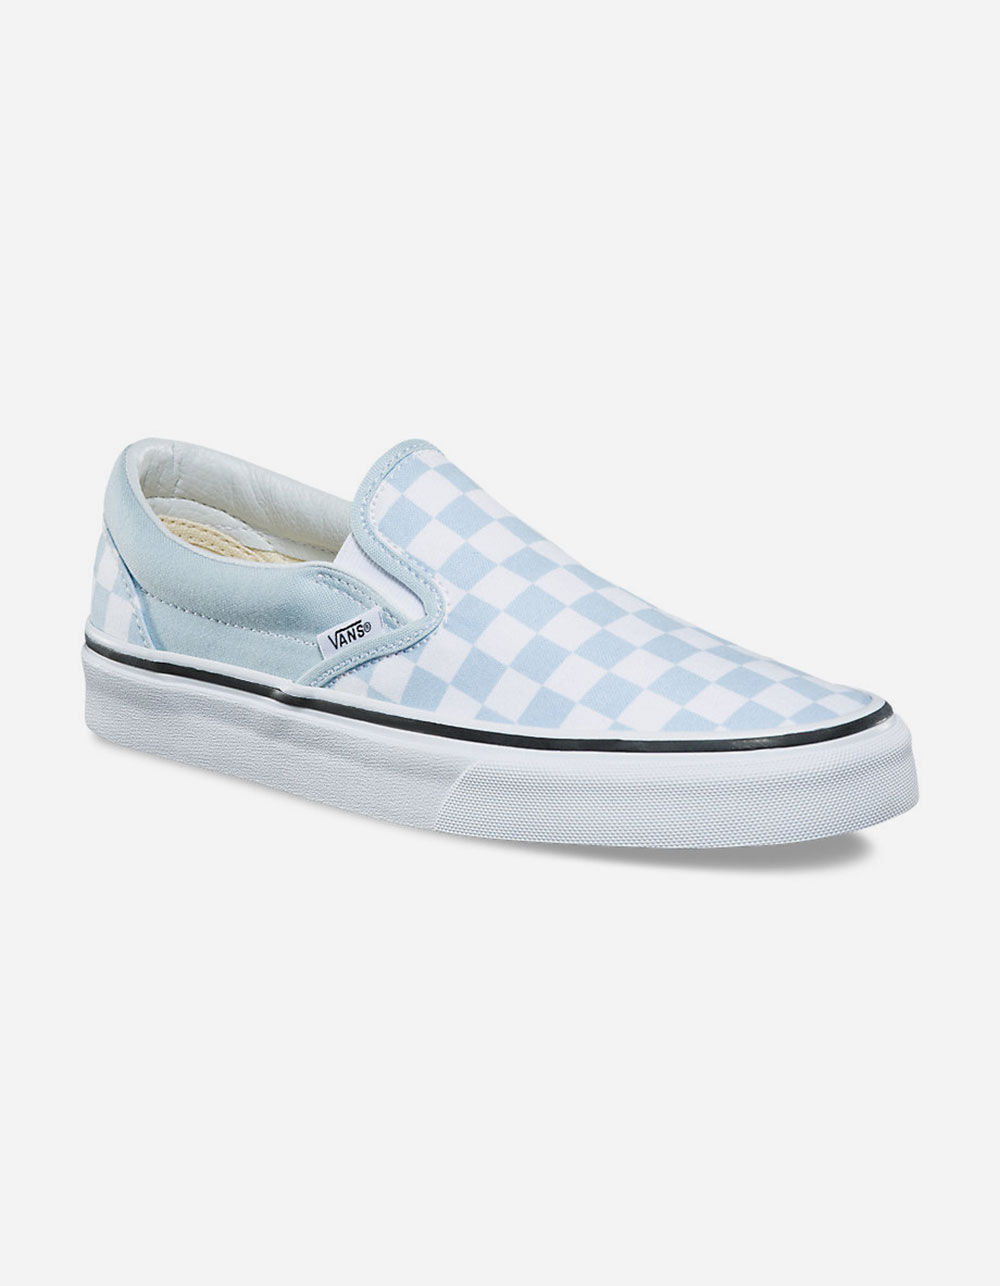 VANS Checkerboard Baby Blue Womens Slip-On Shoes - BABY BLUE | Tillys